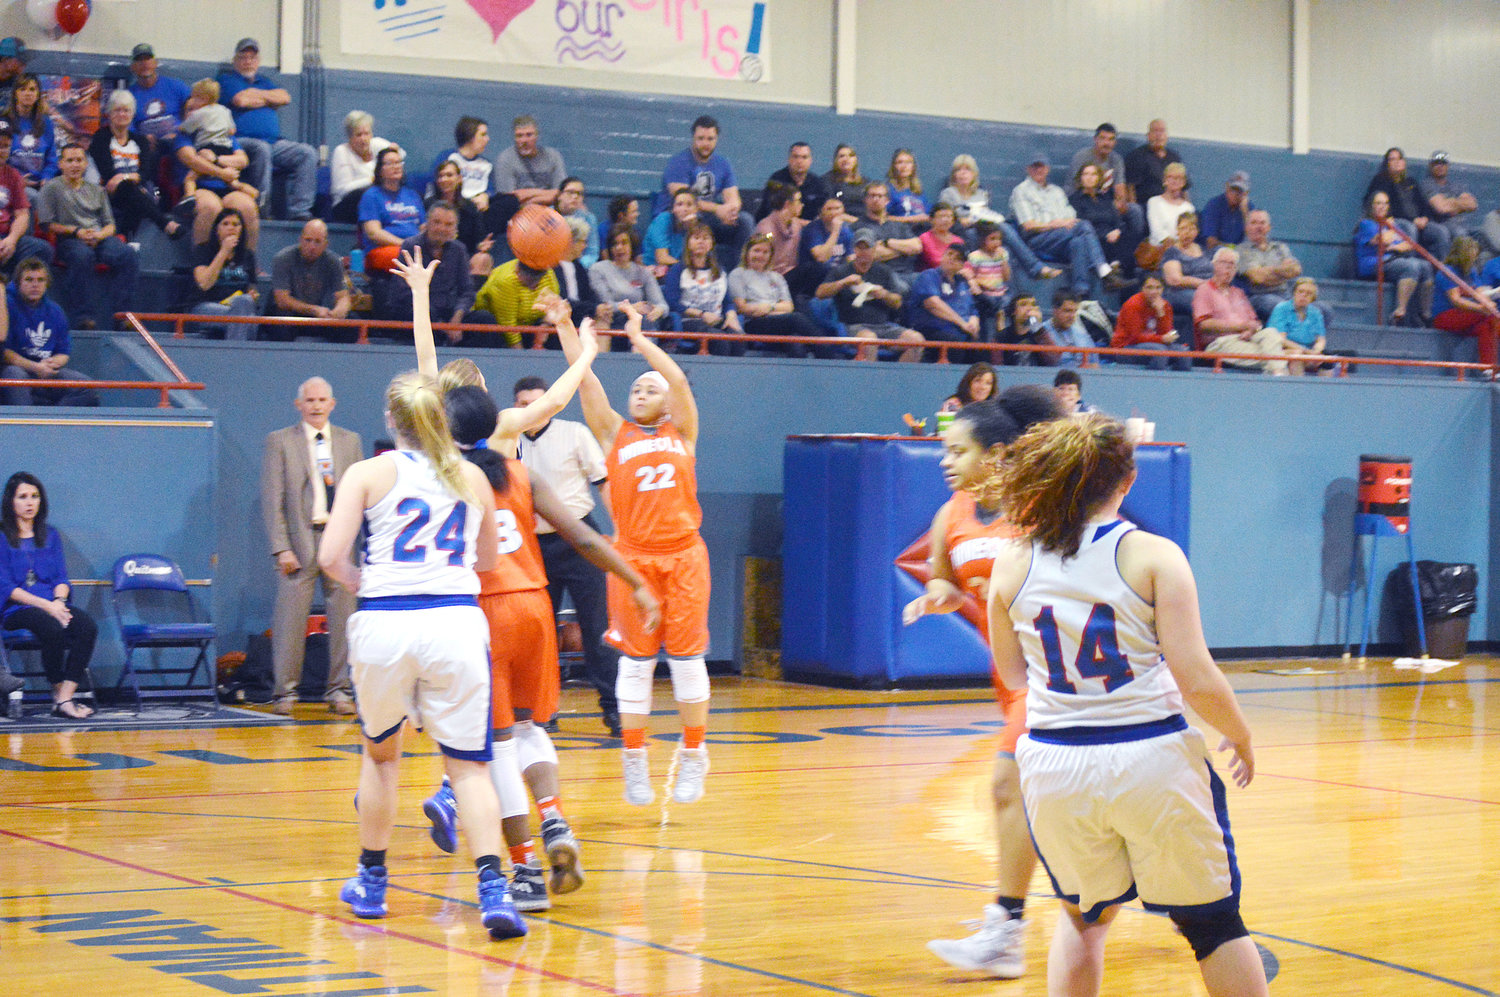 Mineola’s Bri McCalla (22) hits on a three-point shot. She had a game high 22 points in Mineola’s win over Quitman last Tuesday night. (Monitor photo by Larry Tucker)